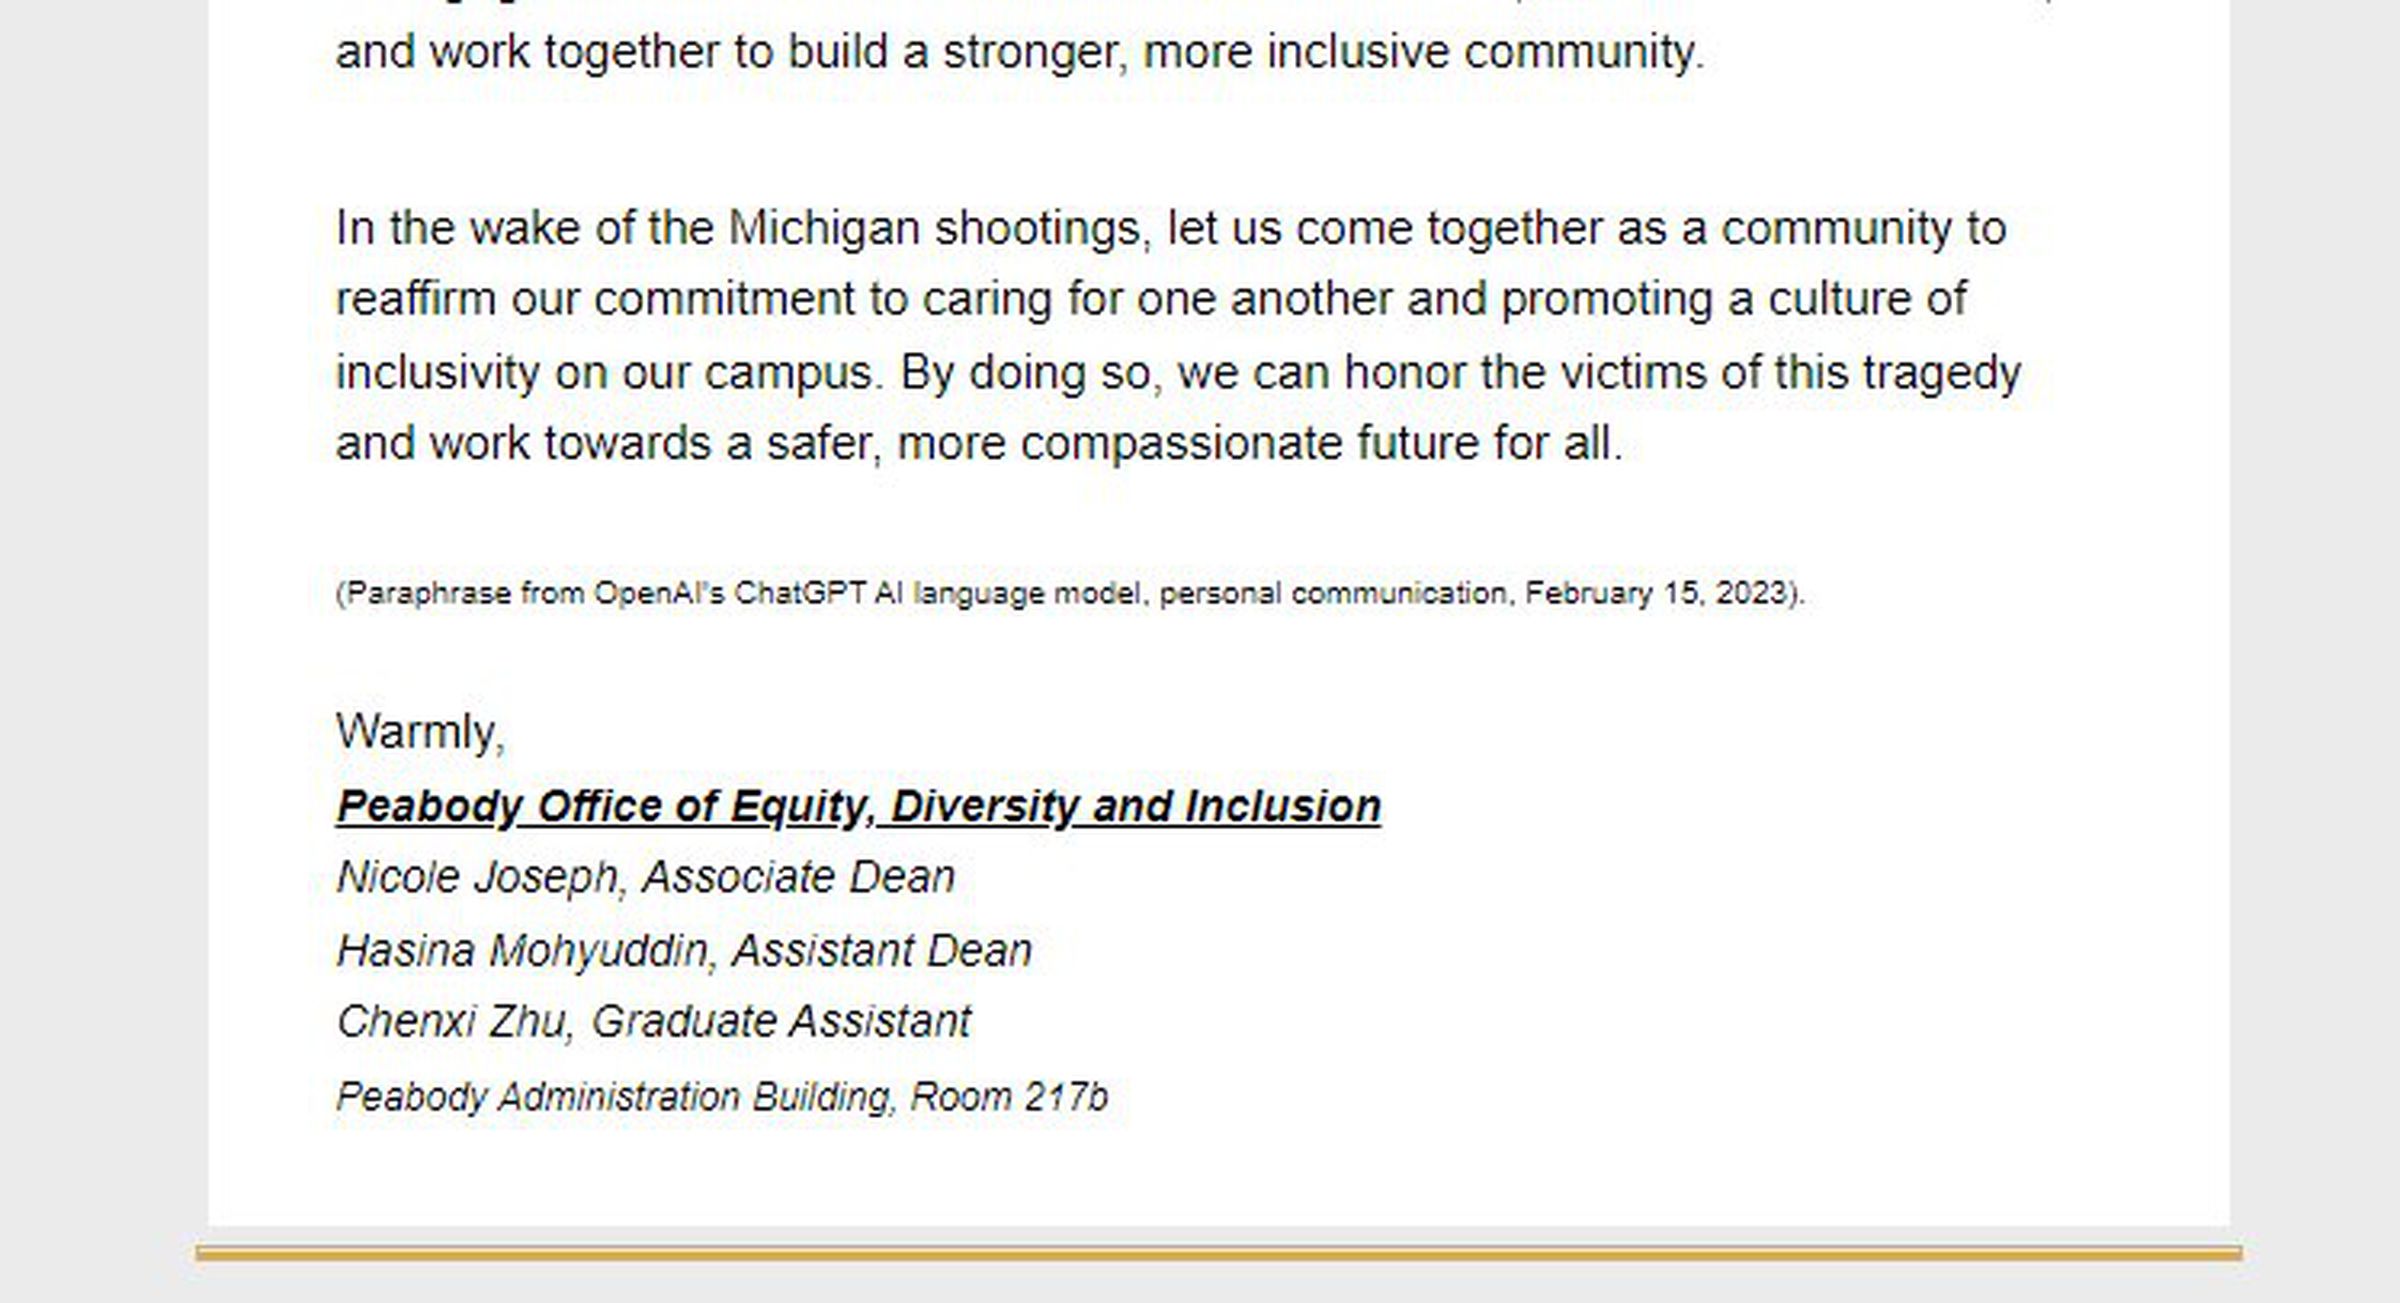 In the wake of the Michigan shootings, let us come together as a community to reaffirm our commitment to caring for one another and promoting a culture of inclusivity on our campus. By doing so, we can honor the victims of this tragedy and work towards a safer, more compassionate future for all. (Paraphrase from OpenAI’s ChatGPT AI language model, personal communication, February 15, 2023).